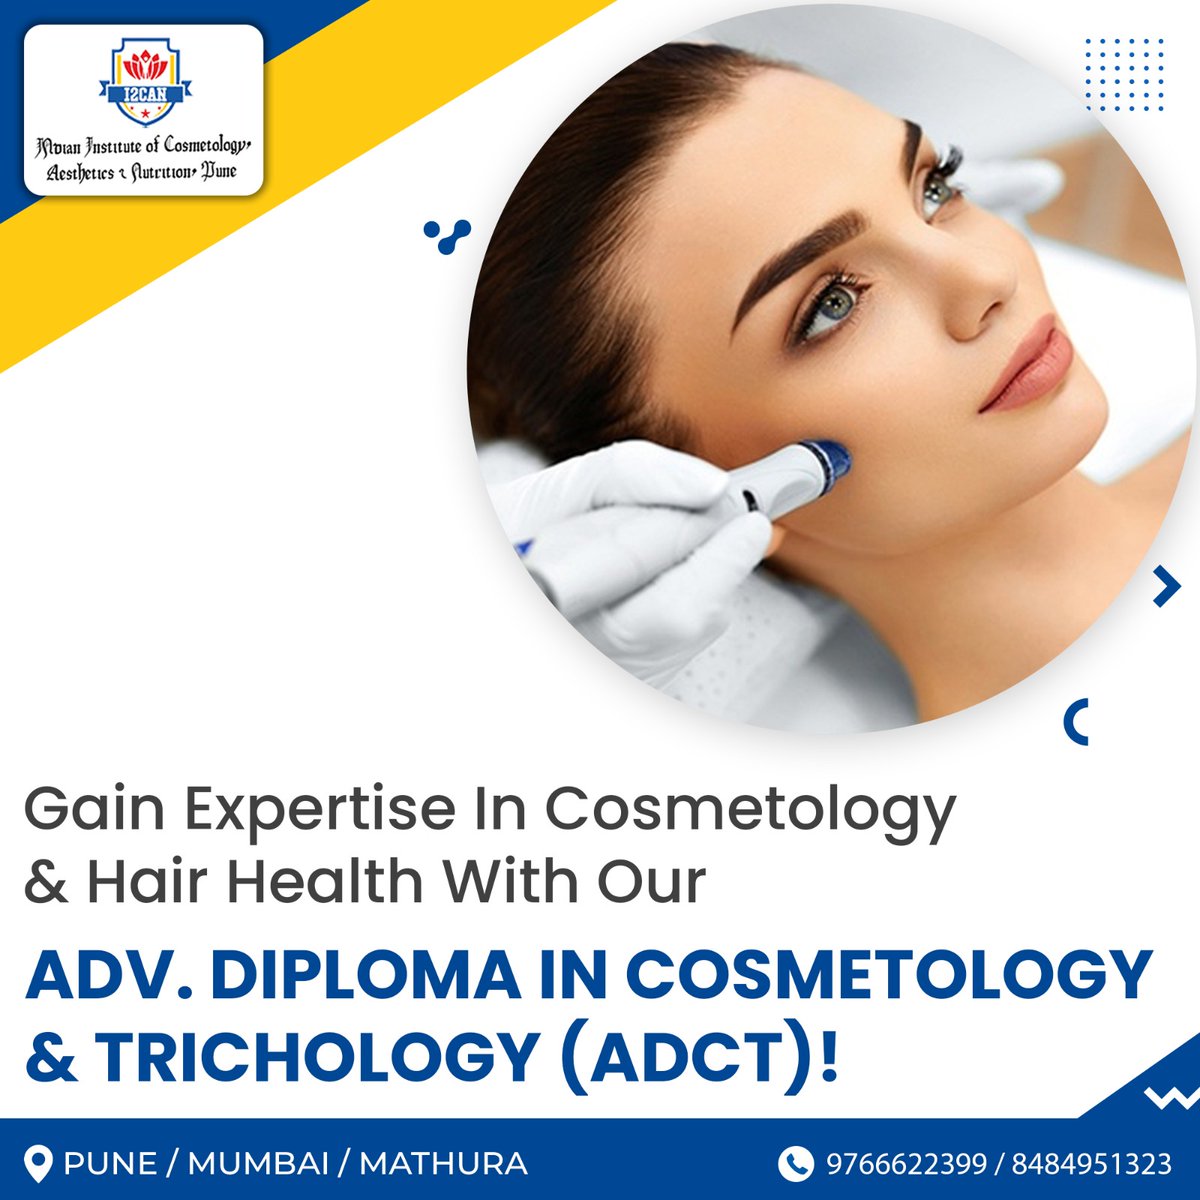 Don't miss out on this transformative opportunity! Enroll now and Start on your journey towards ADV. DIPLOMA IN COSMETOLOGY & TRICHOLOGY (ADCT) success. 💇‍♀️💅

📲 8484951323

📲 9766622399

#CosmetologyCareer #PostGraduateDiploma #SkincareExpertise #ProfessionalDevelopment